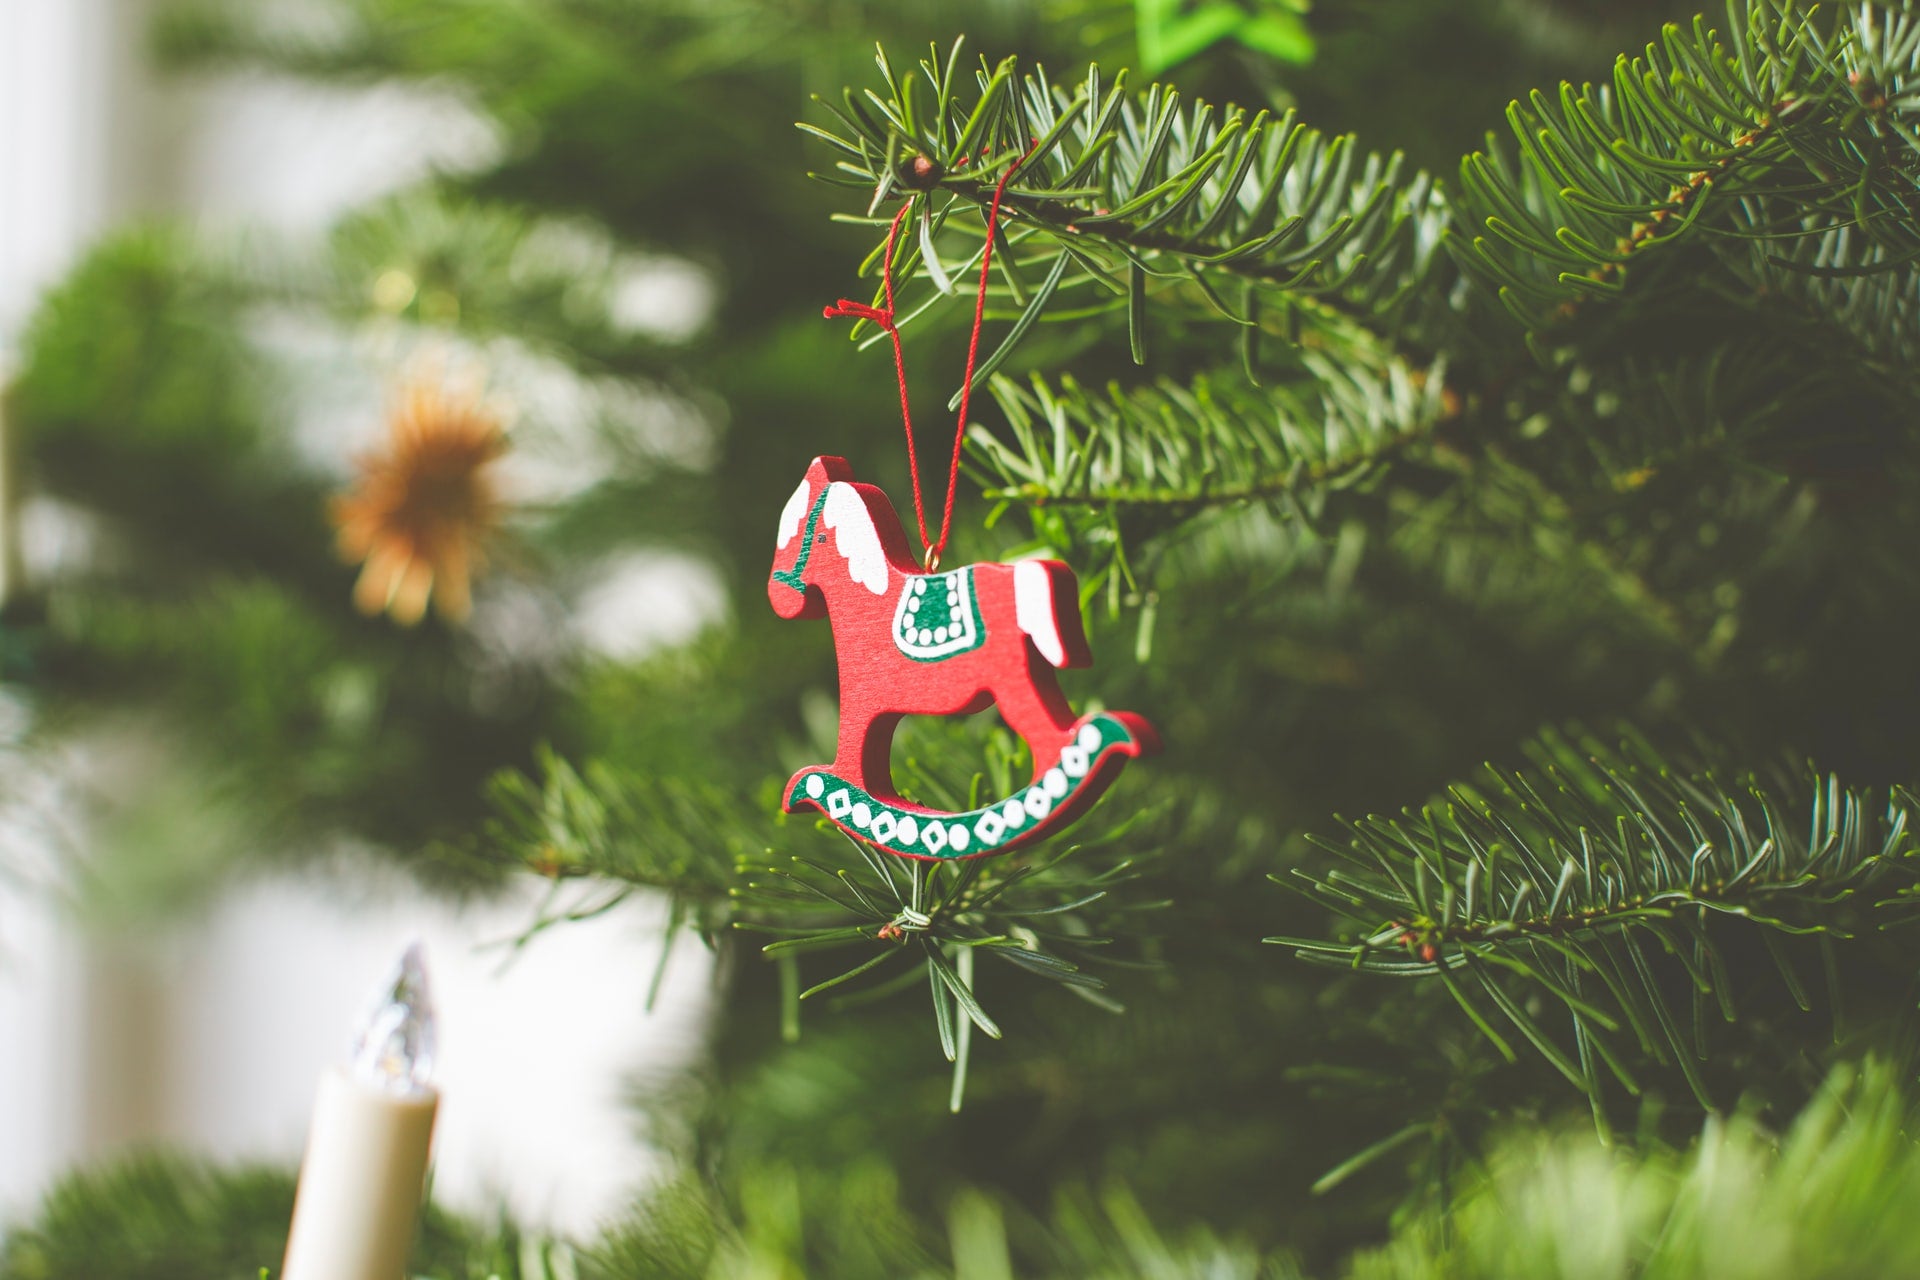 holiday horse gifts for tweens, small red rocking horse tree ornament hangs from pine tree